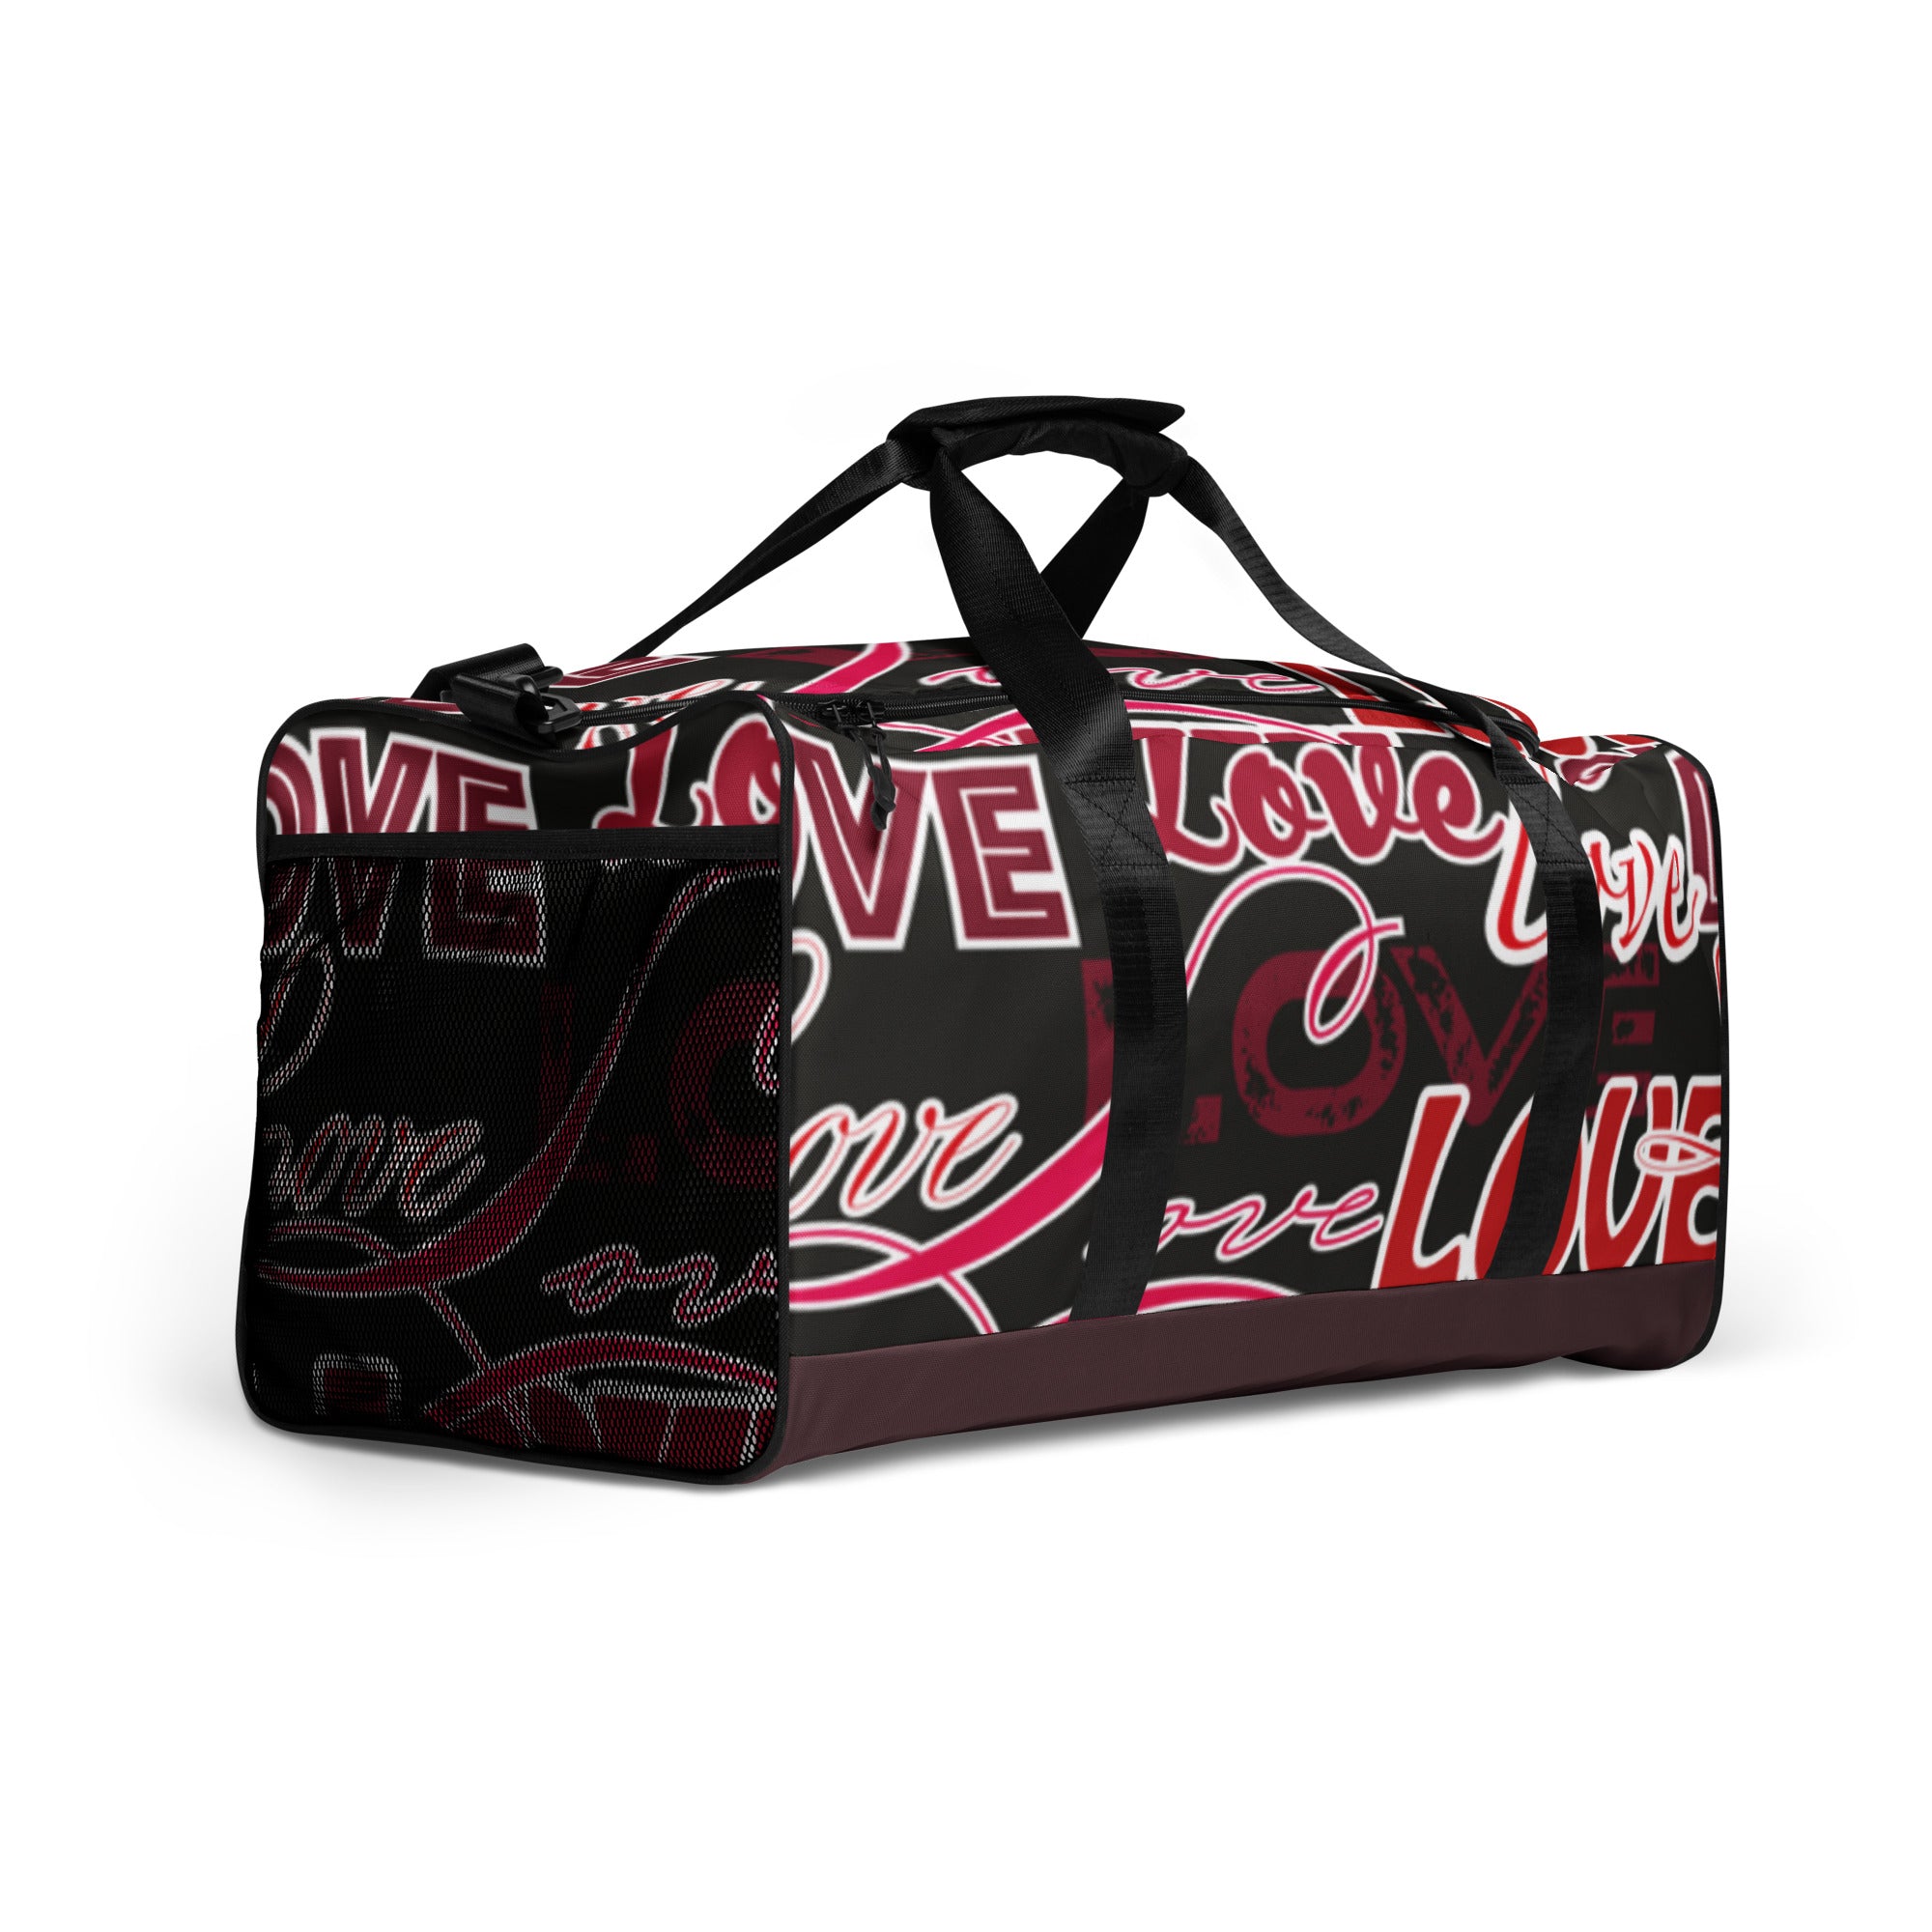 TIME OF VIBES TOV Reisetasche LOVE TWO - €99,00